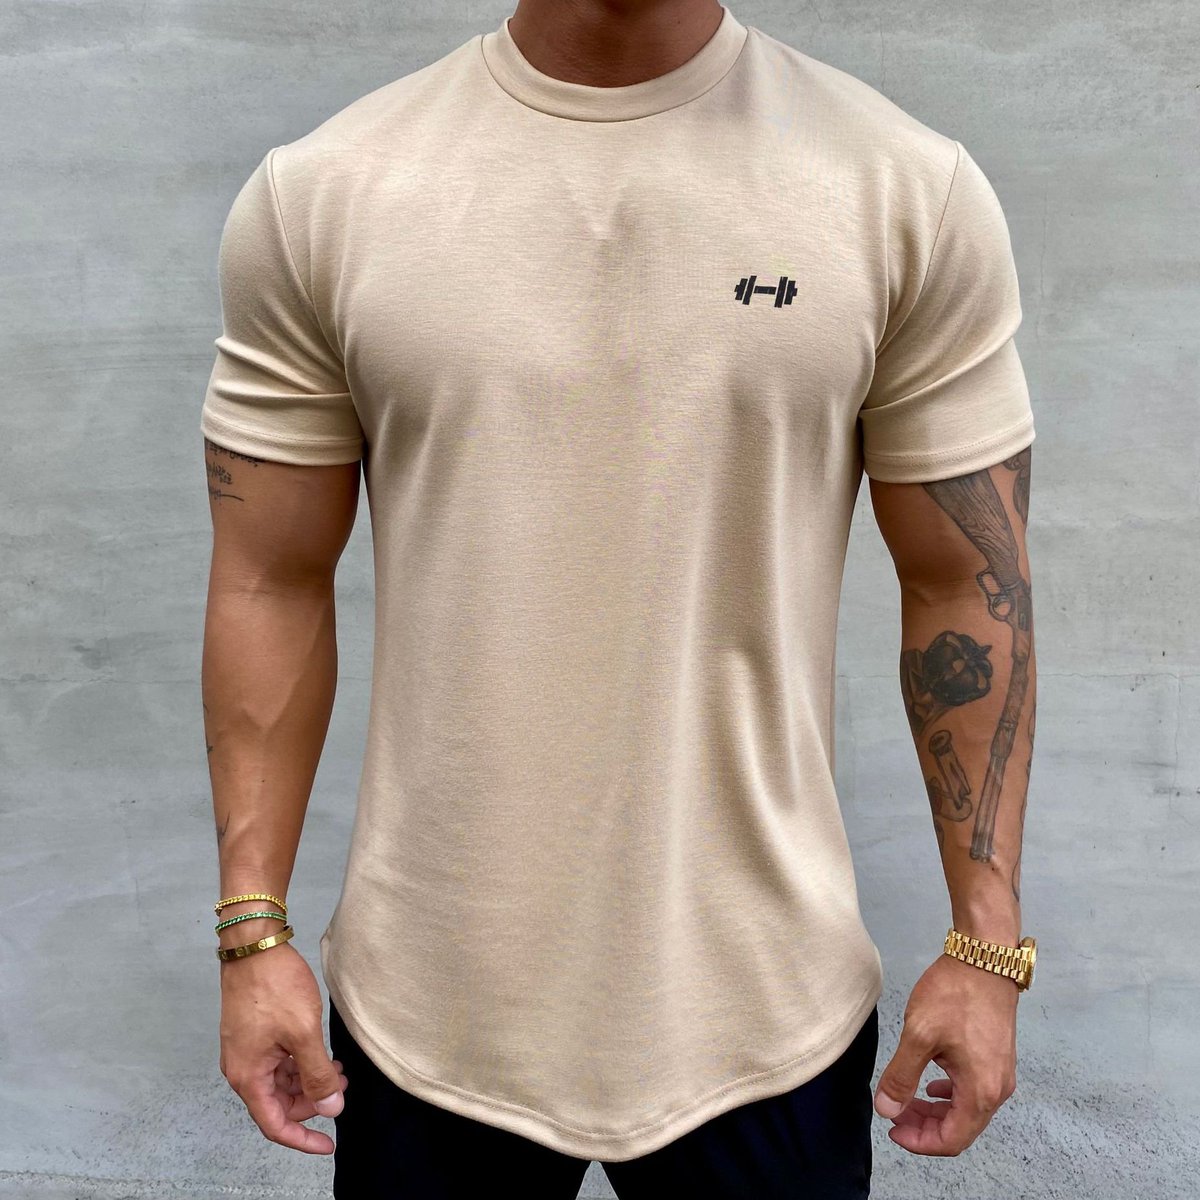 Introducing our Pure Cotton Stretchy Sports T-shirt, designed for those who seek comfort and flexibility during workouts.
Shop now: tropicaltrends.co/E7654